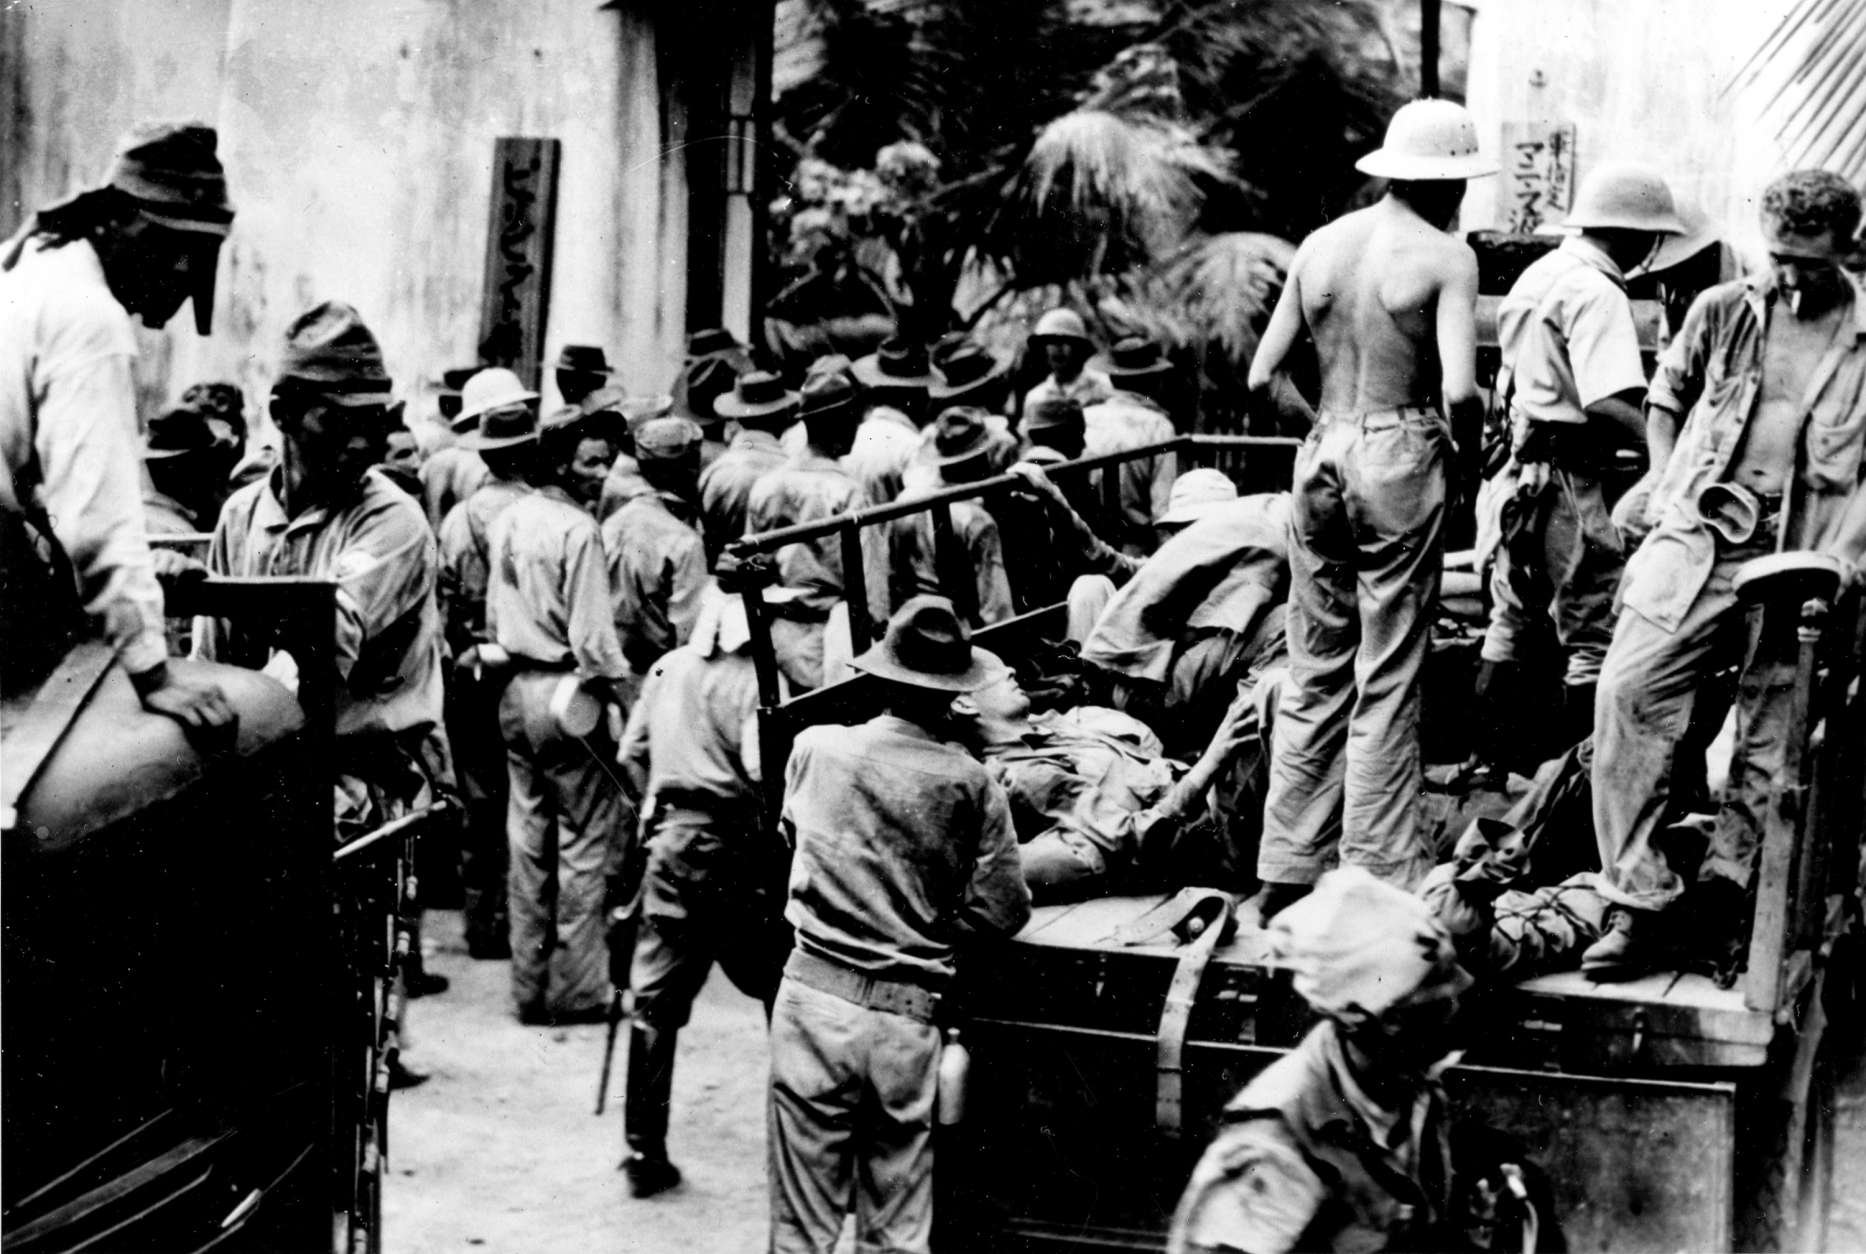 American and Filipino prisoners of war, captured by the Japanese on Corregidor Island, are hauled away in trucks to Bilibid Prison in Manila, Philippines, in 1942 during World War II.  (AP Photo)